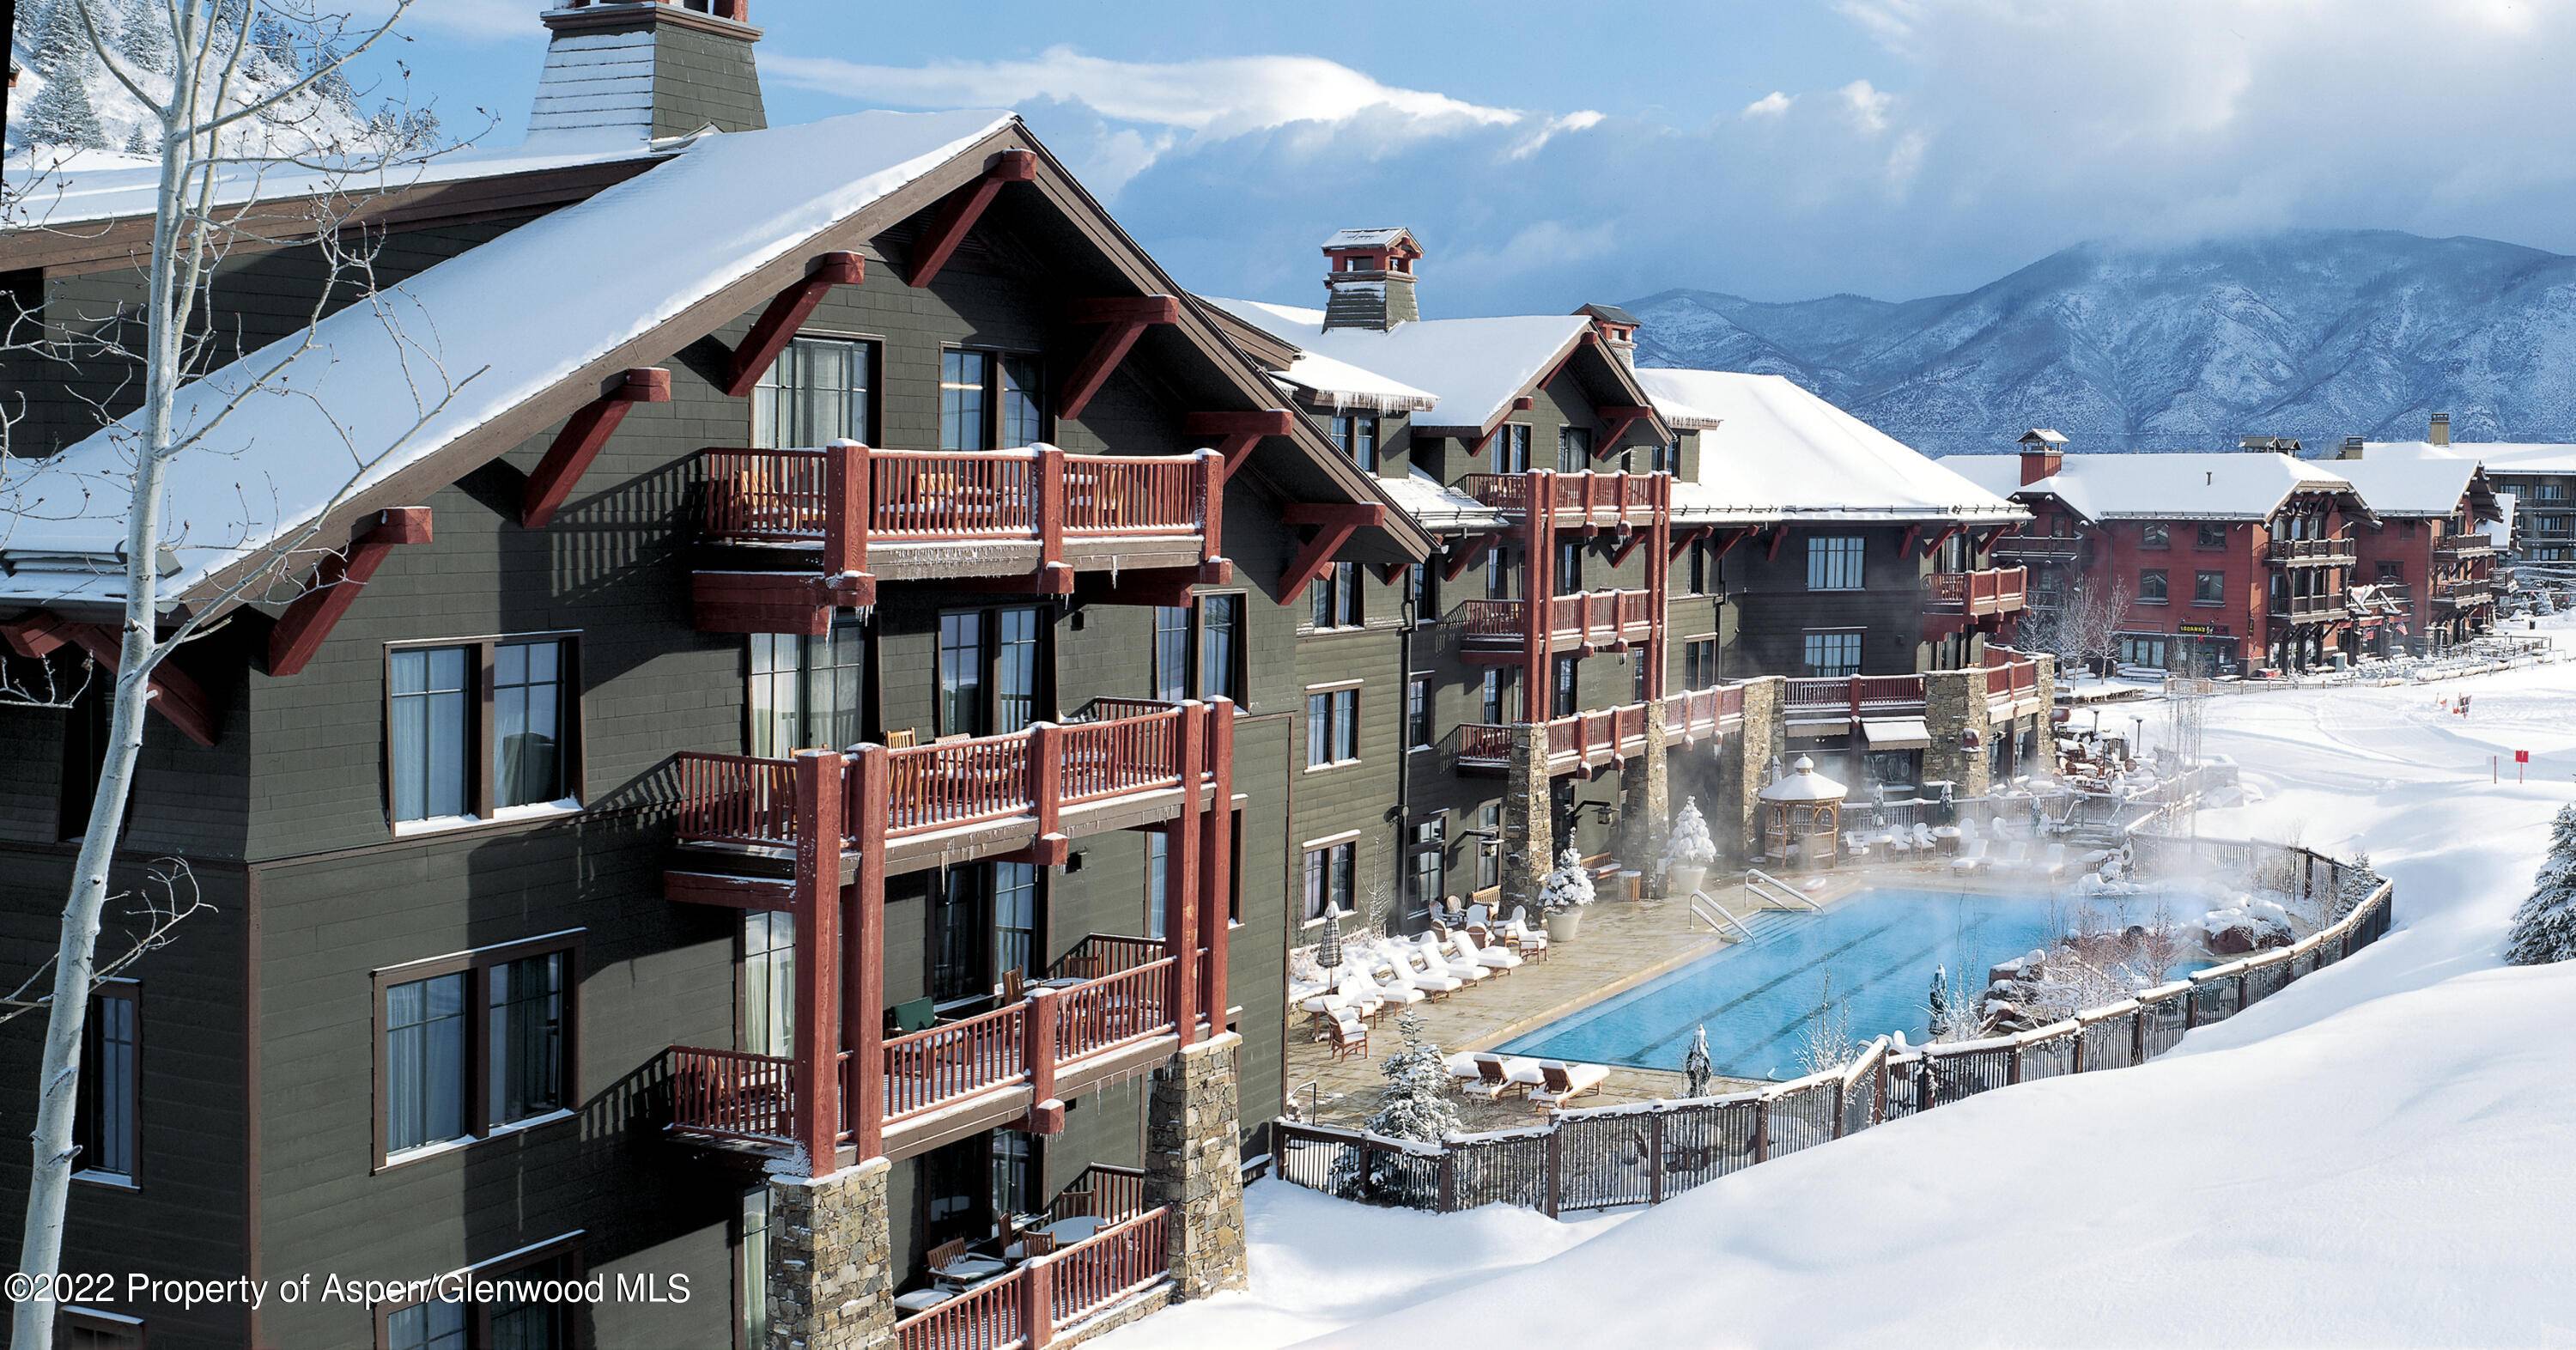 Rare fixed week offering at the Ritz that includes a prime ski week and two prime summer weeks plus a float week each year.